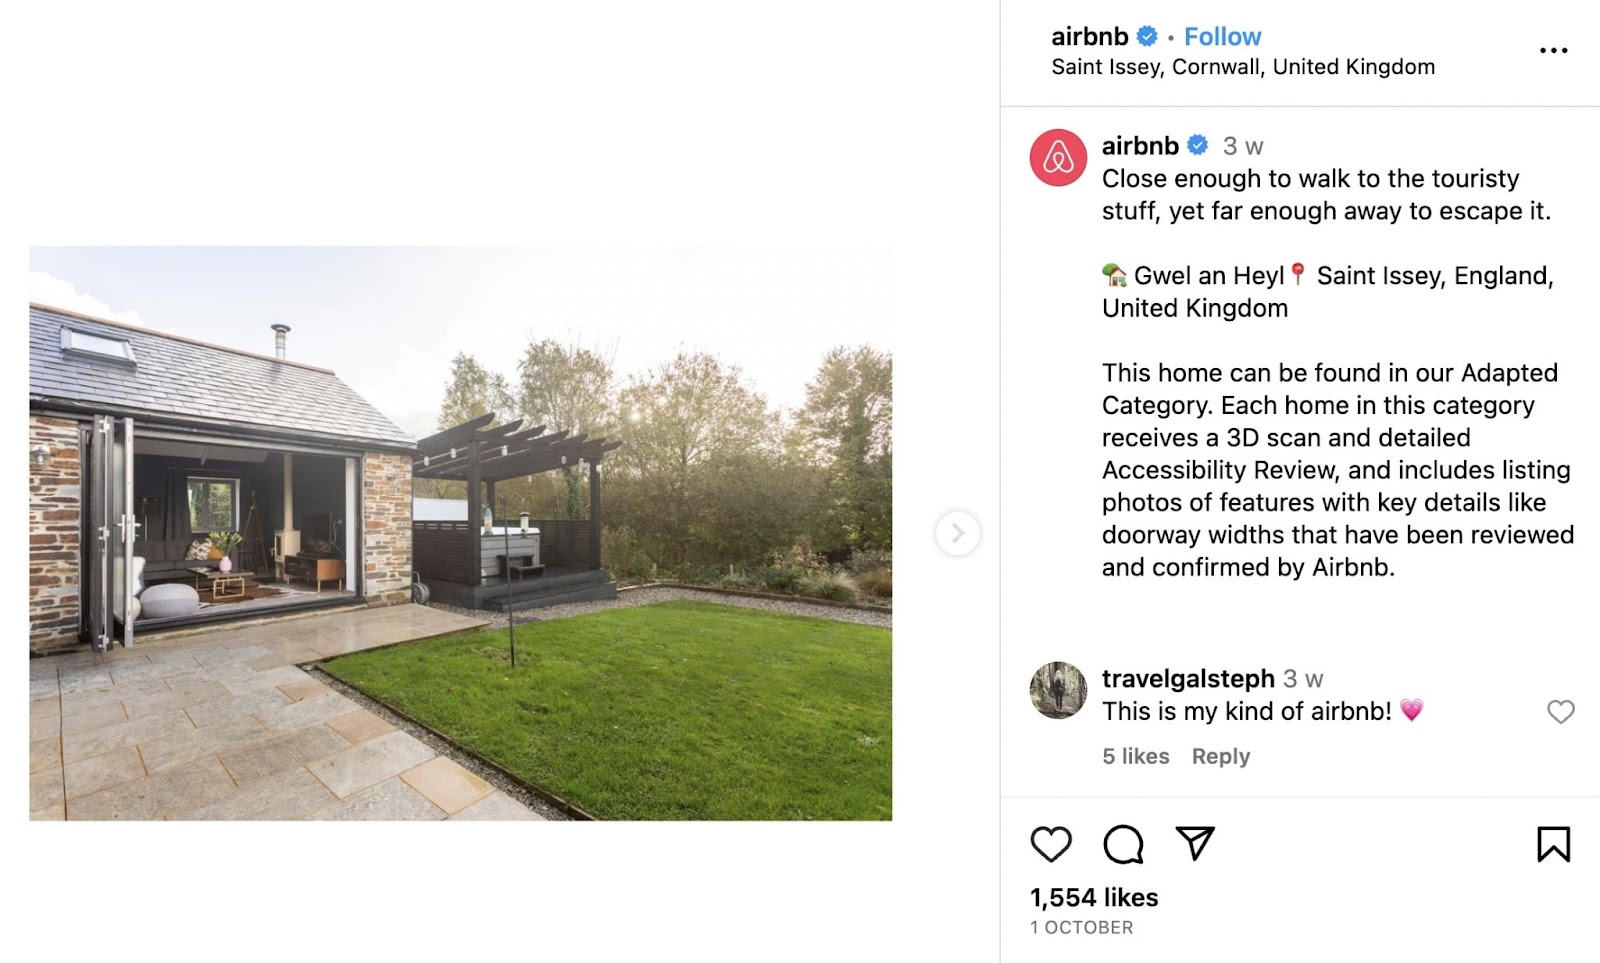 Airbnb’s home-shot Instagram post